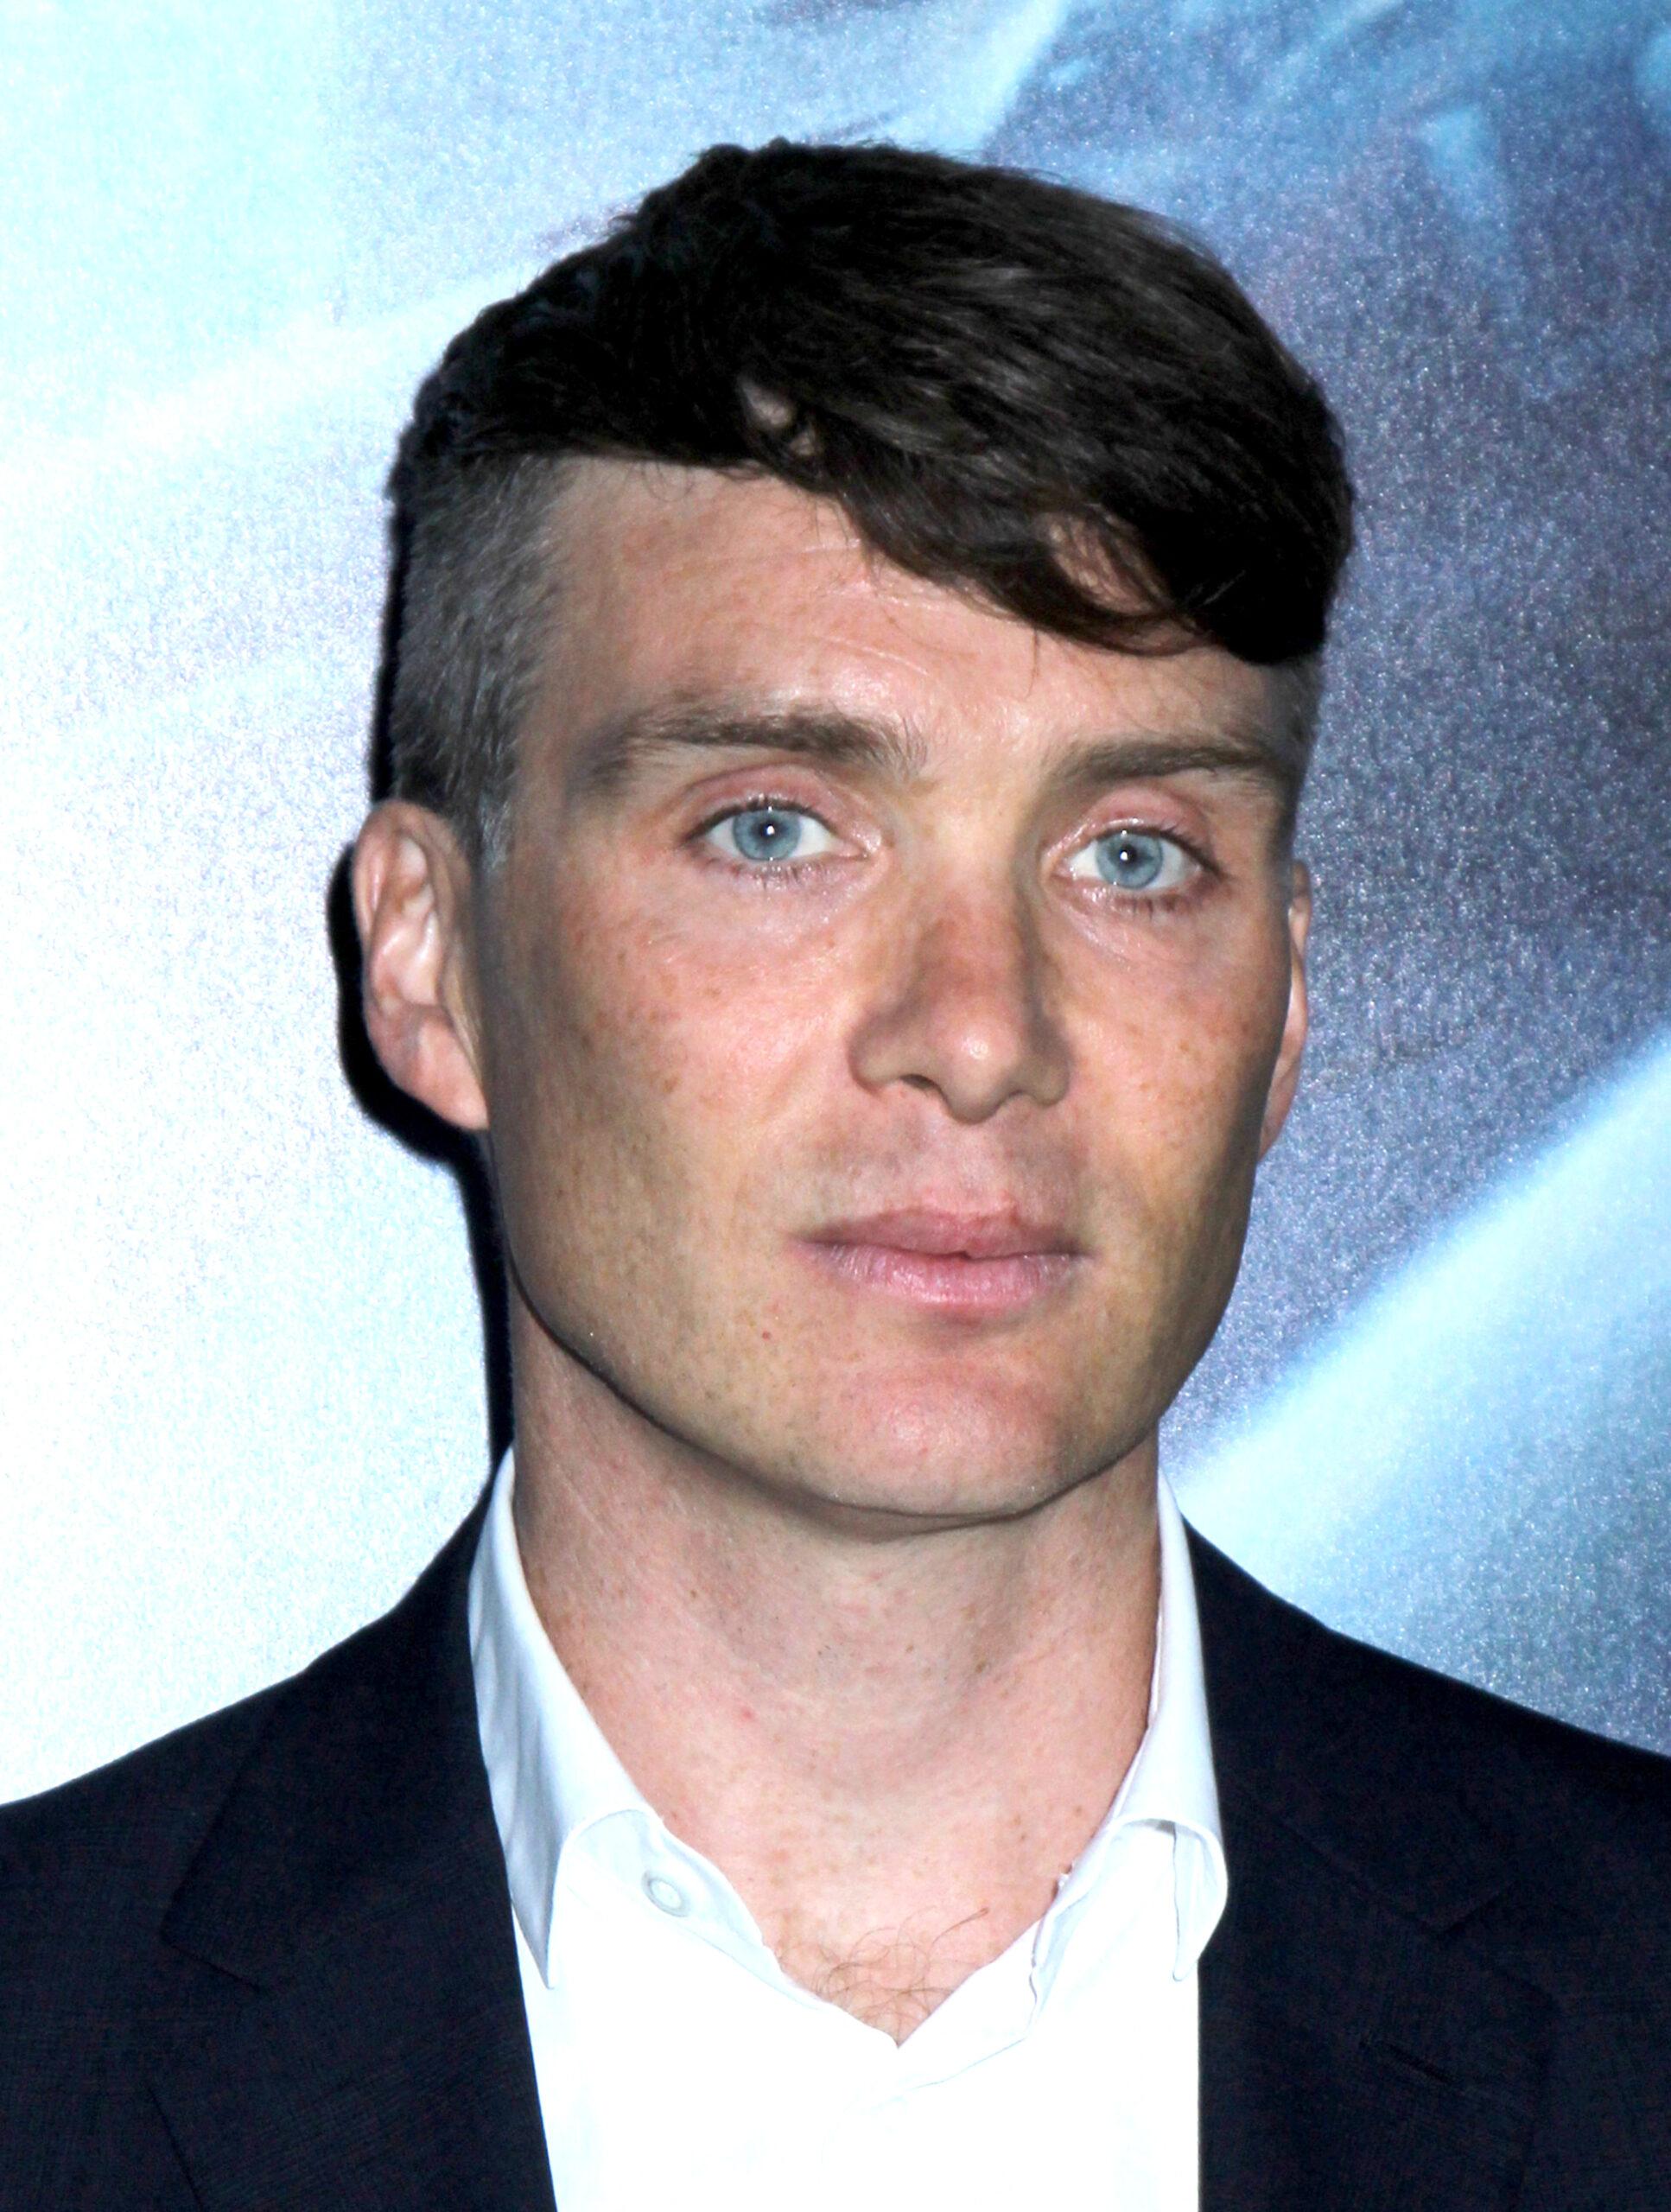 Cillian Murphy at the 'DUNKIRK' US Premiere